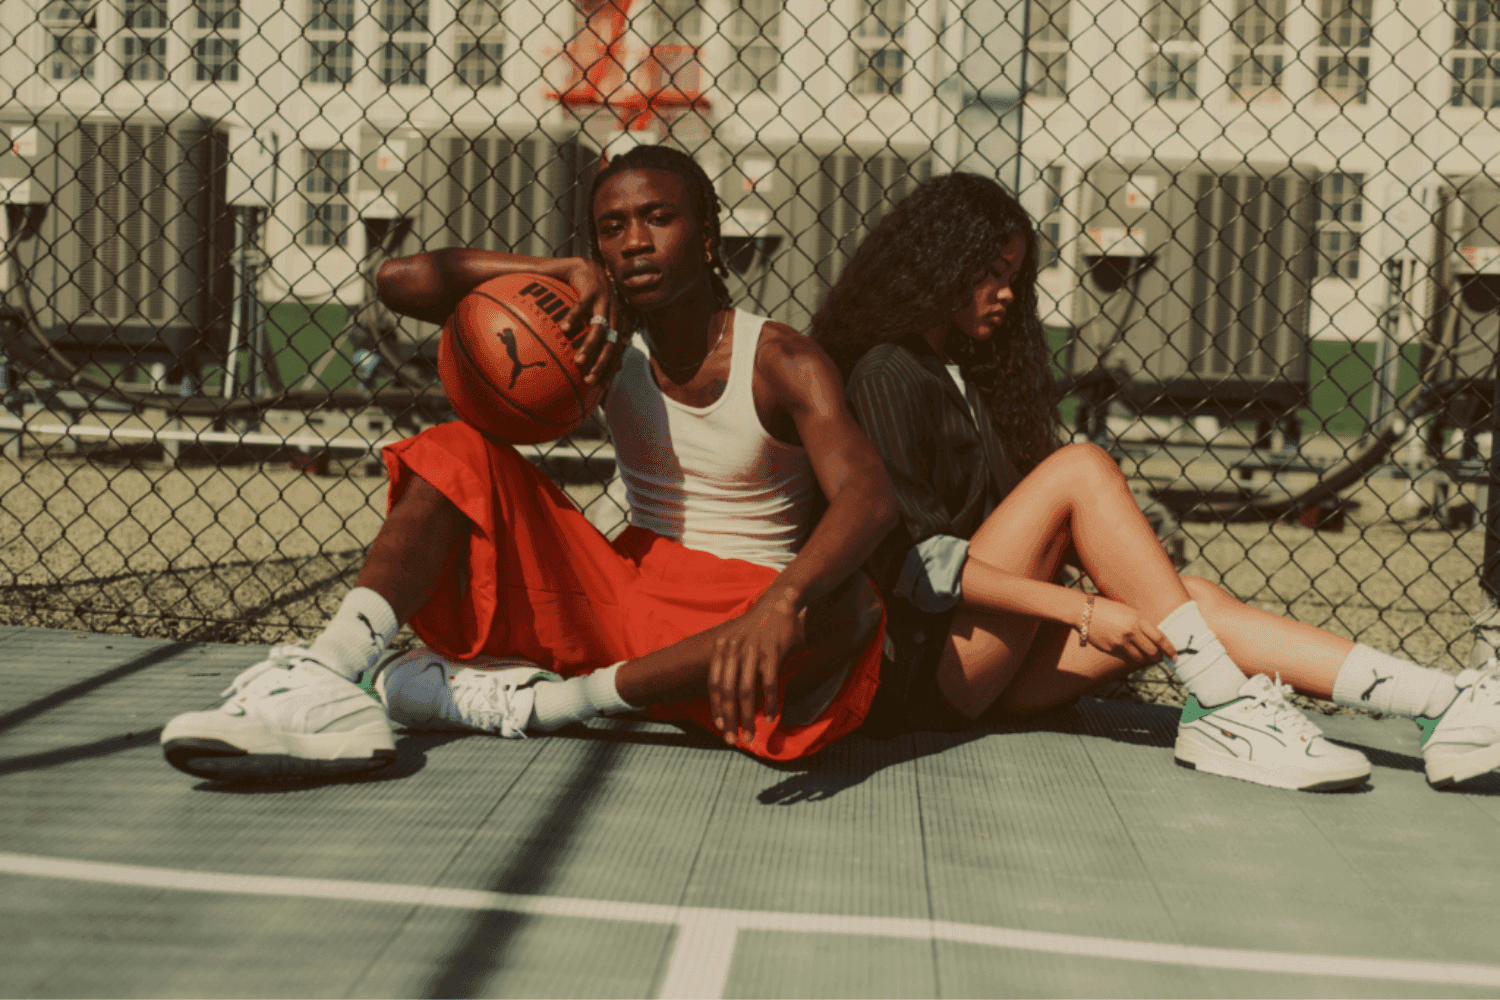 The PUMA Slipstream Bball collection drops soon